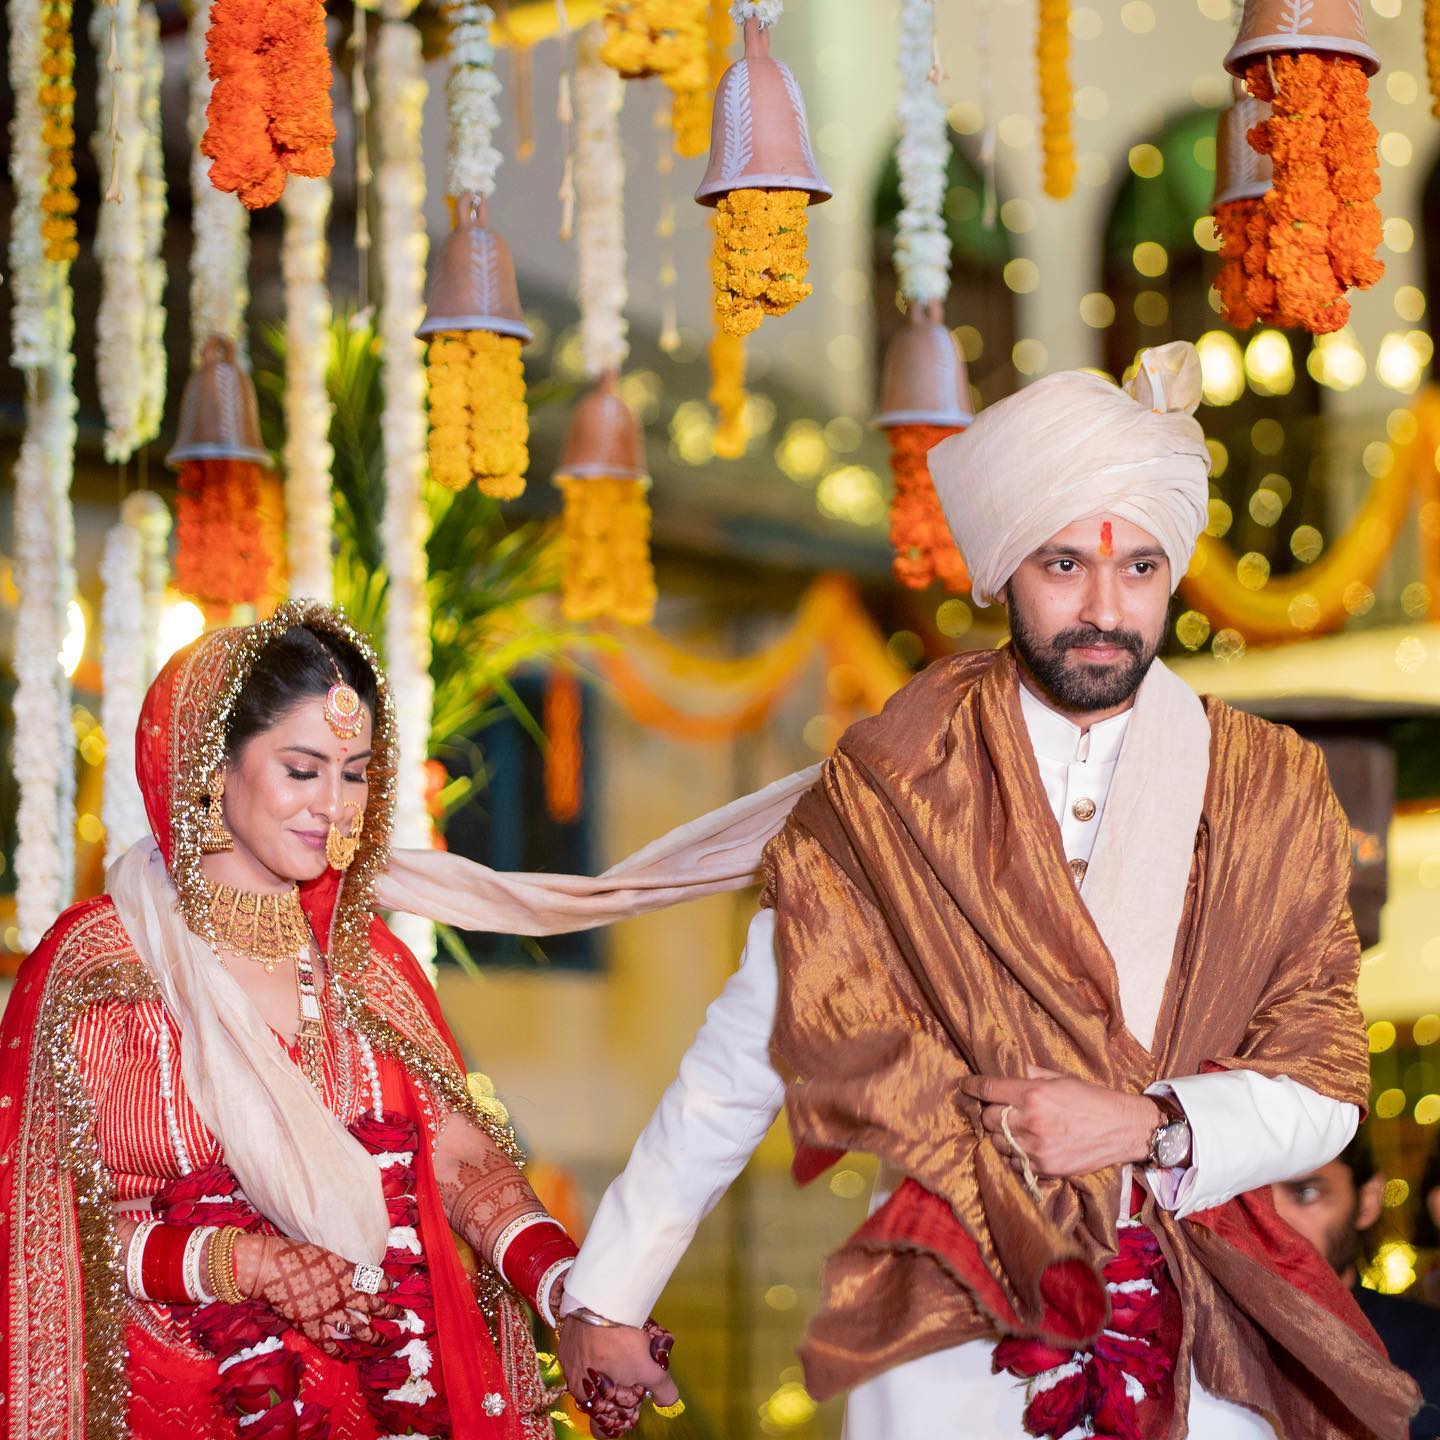 Photos: Vikrant Massey Gets Married To Sheetal Thakur In An Intimate Ceremony